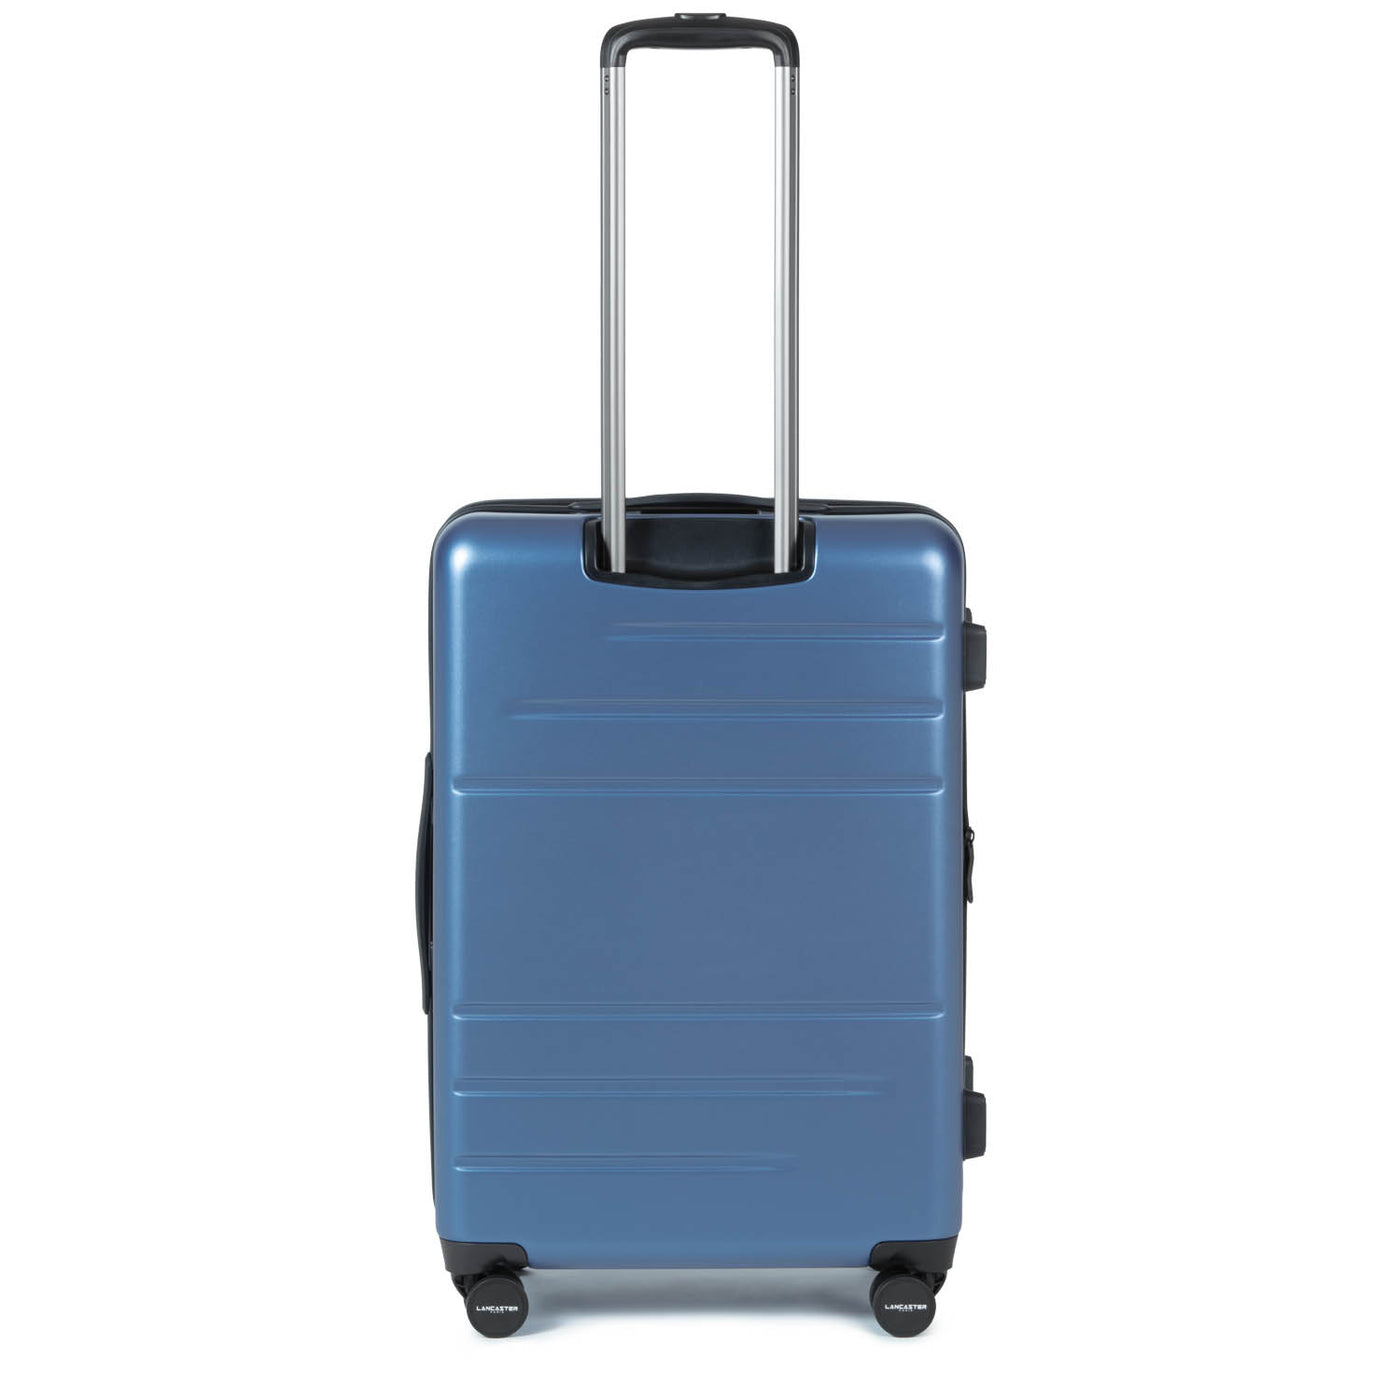 assortment of 3 luggage - luggage #couleur_bleu-mer